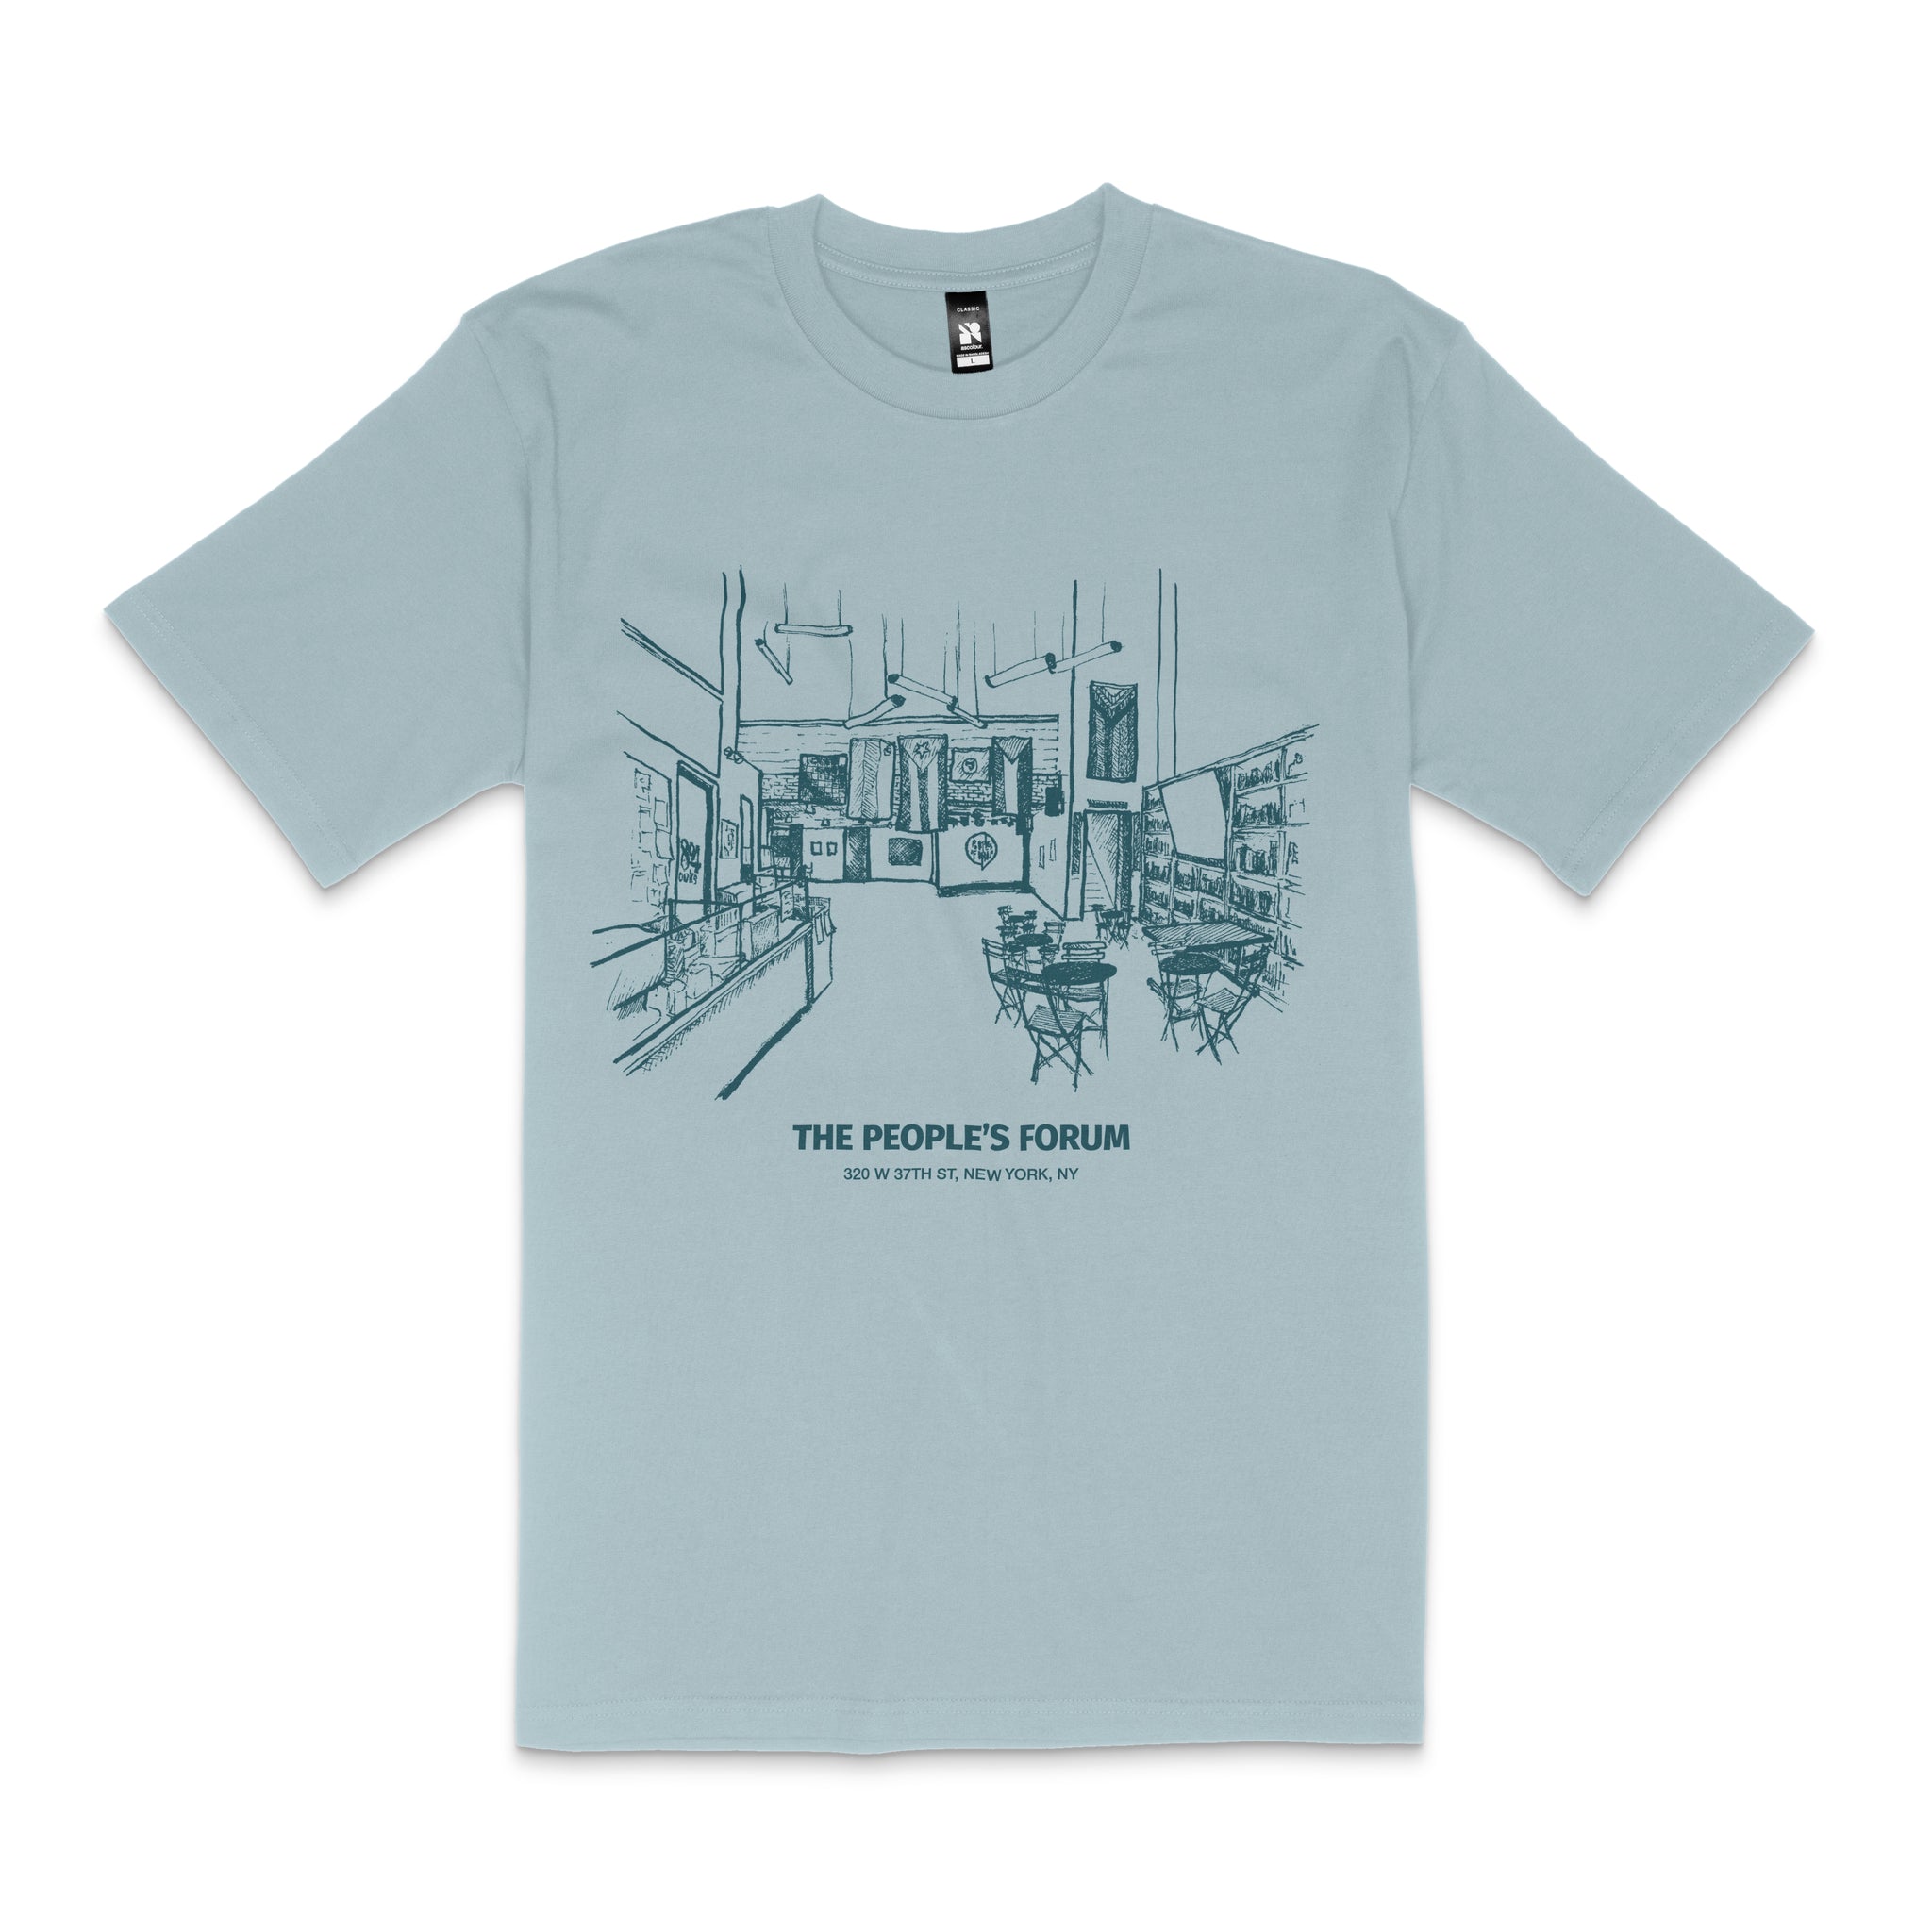 A Home For The People Shirt